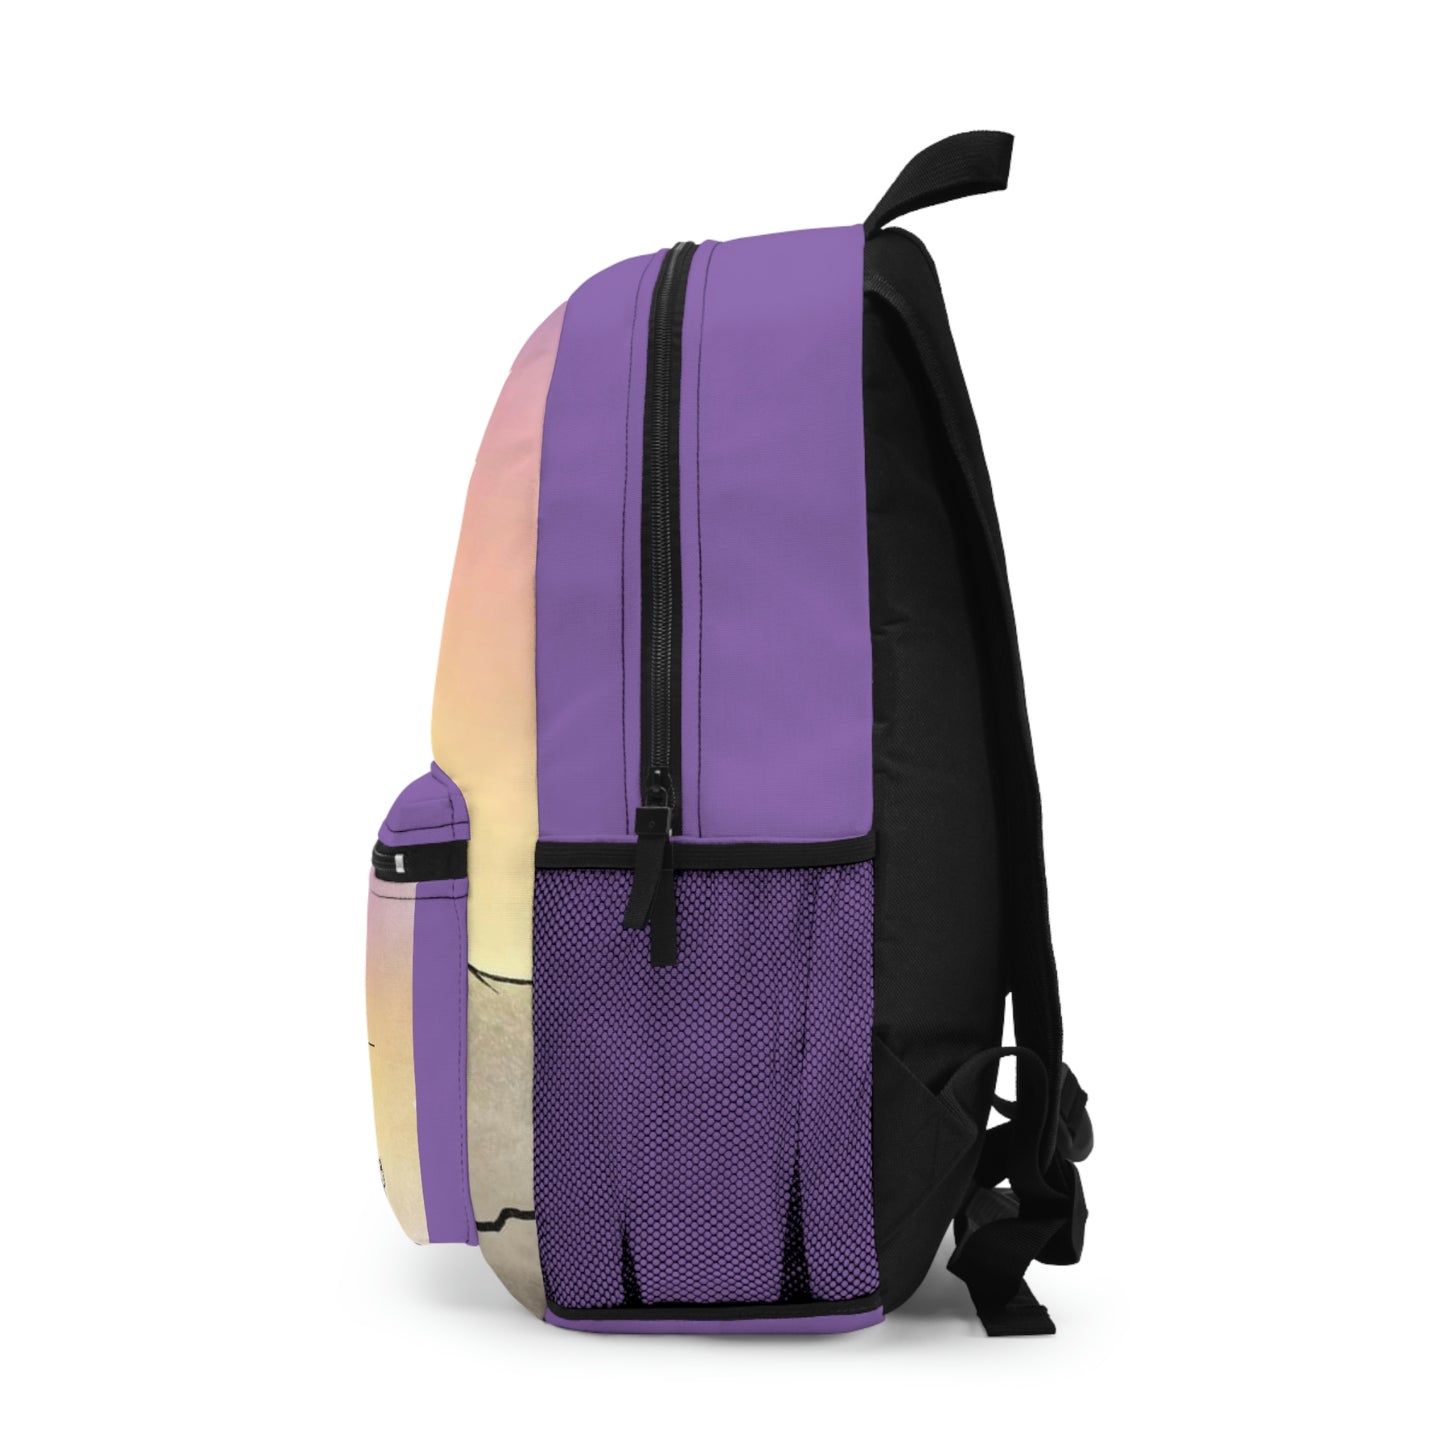 The Purple Cowboy Backpack